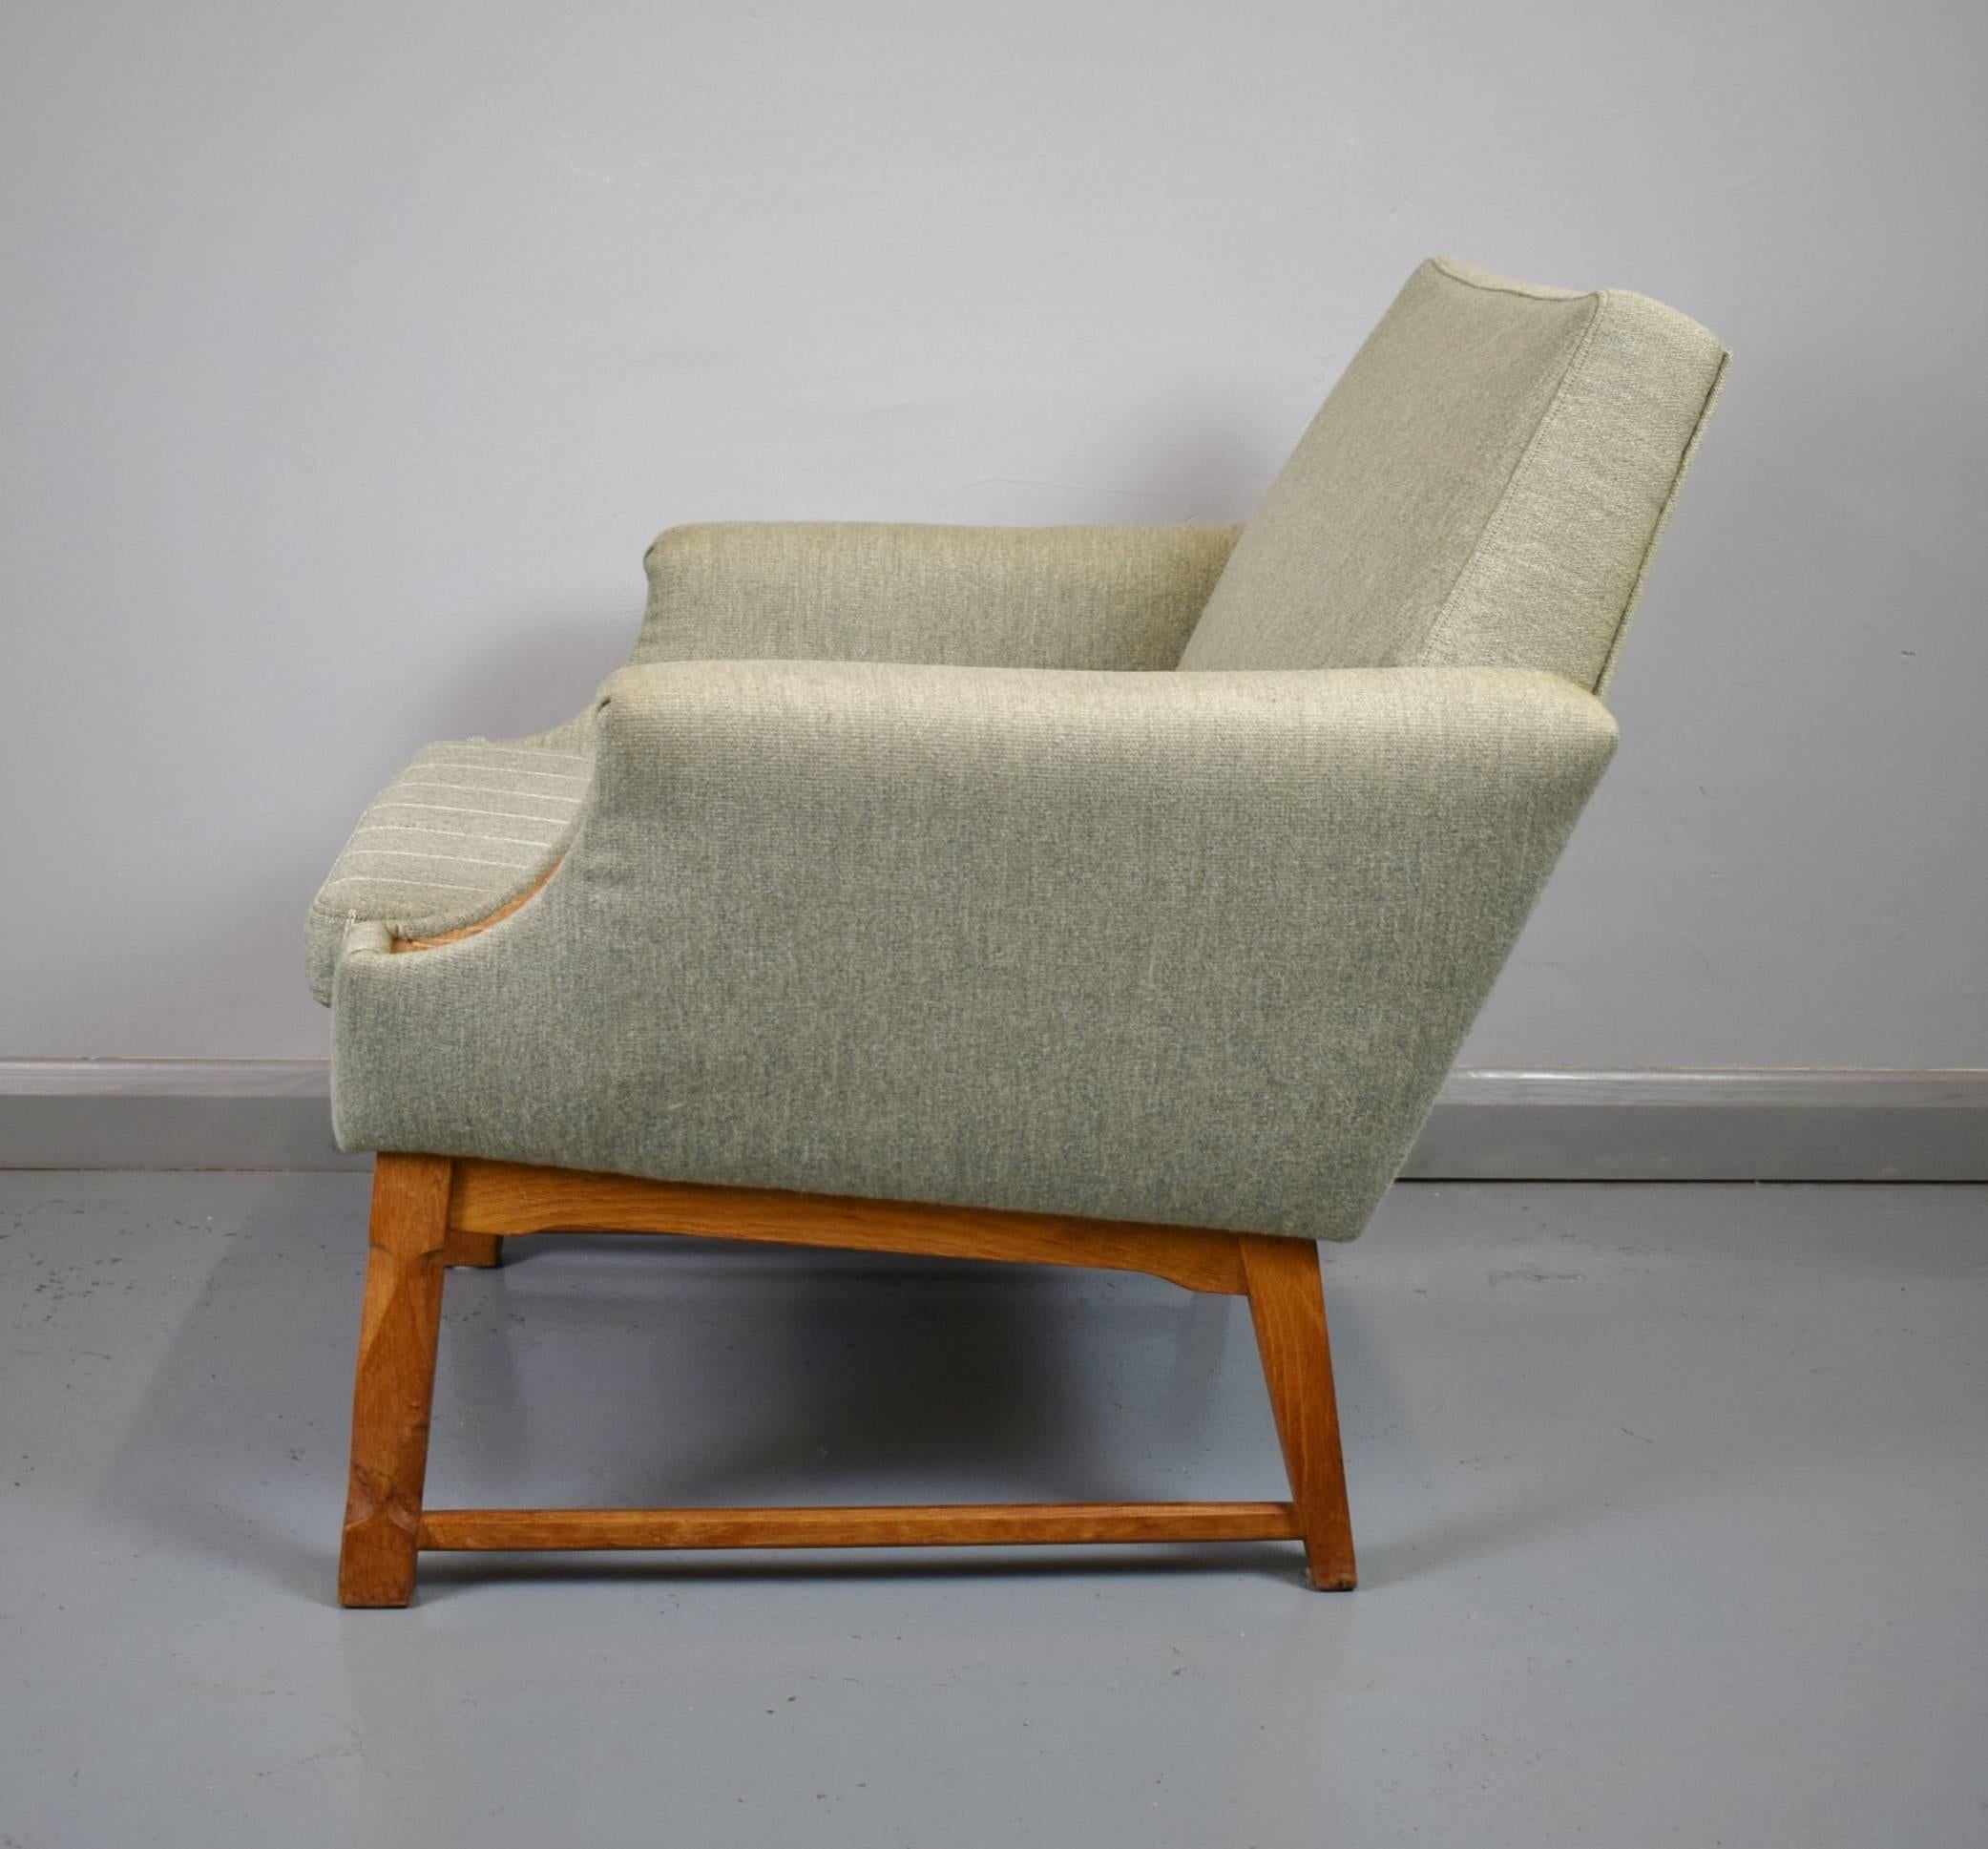 Designer: Danish design

Manufacturer: Unknown

Country: Denmark

Date: 1950s

Material: Wool upholstery and oak detailing.

Maximum dimensions: seat 74 cm W, 76 cm deep, and 76cm tall.
Footstool 45 cm wide, 35 cm deep, and 40 cm